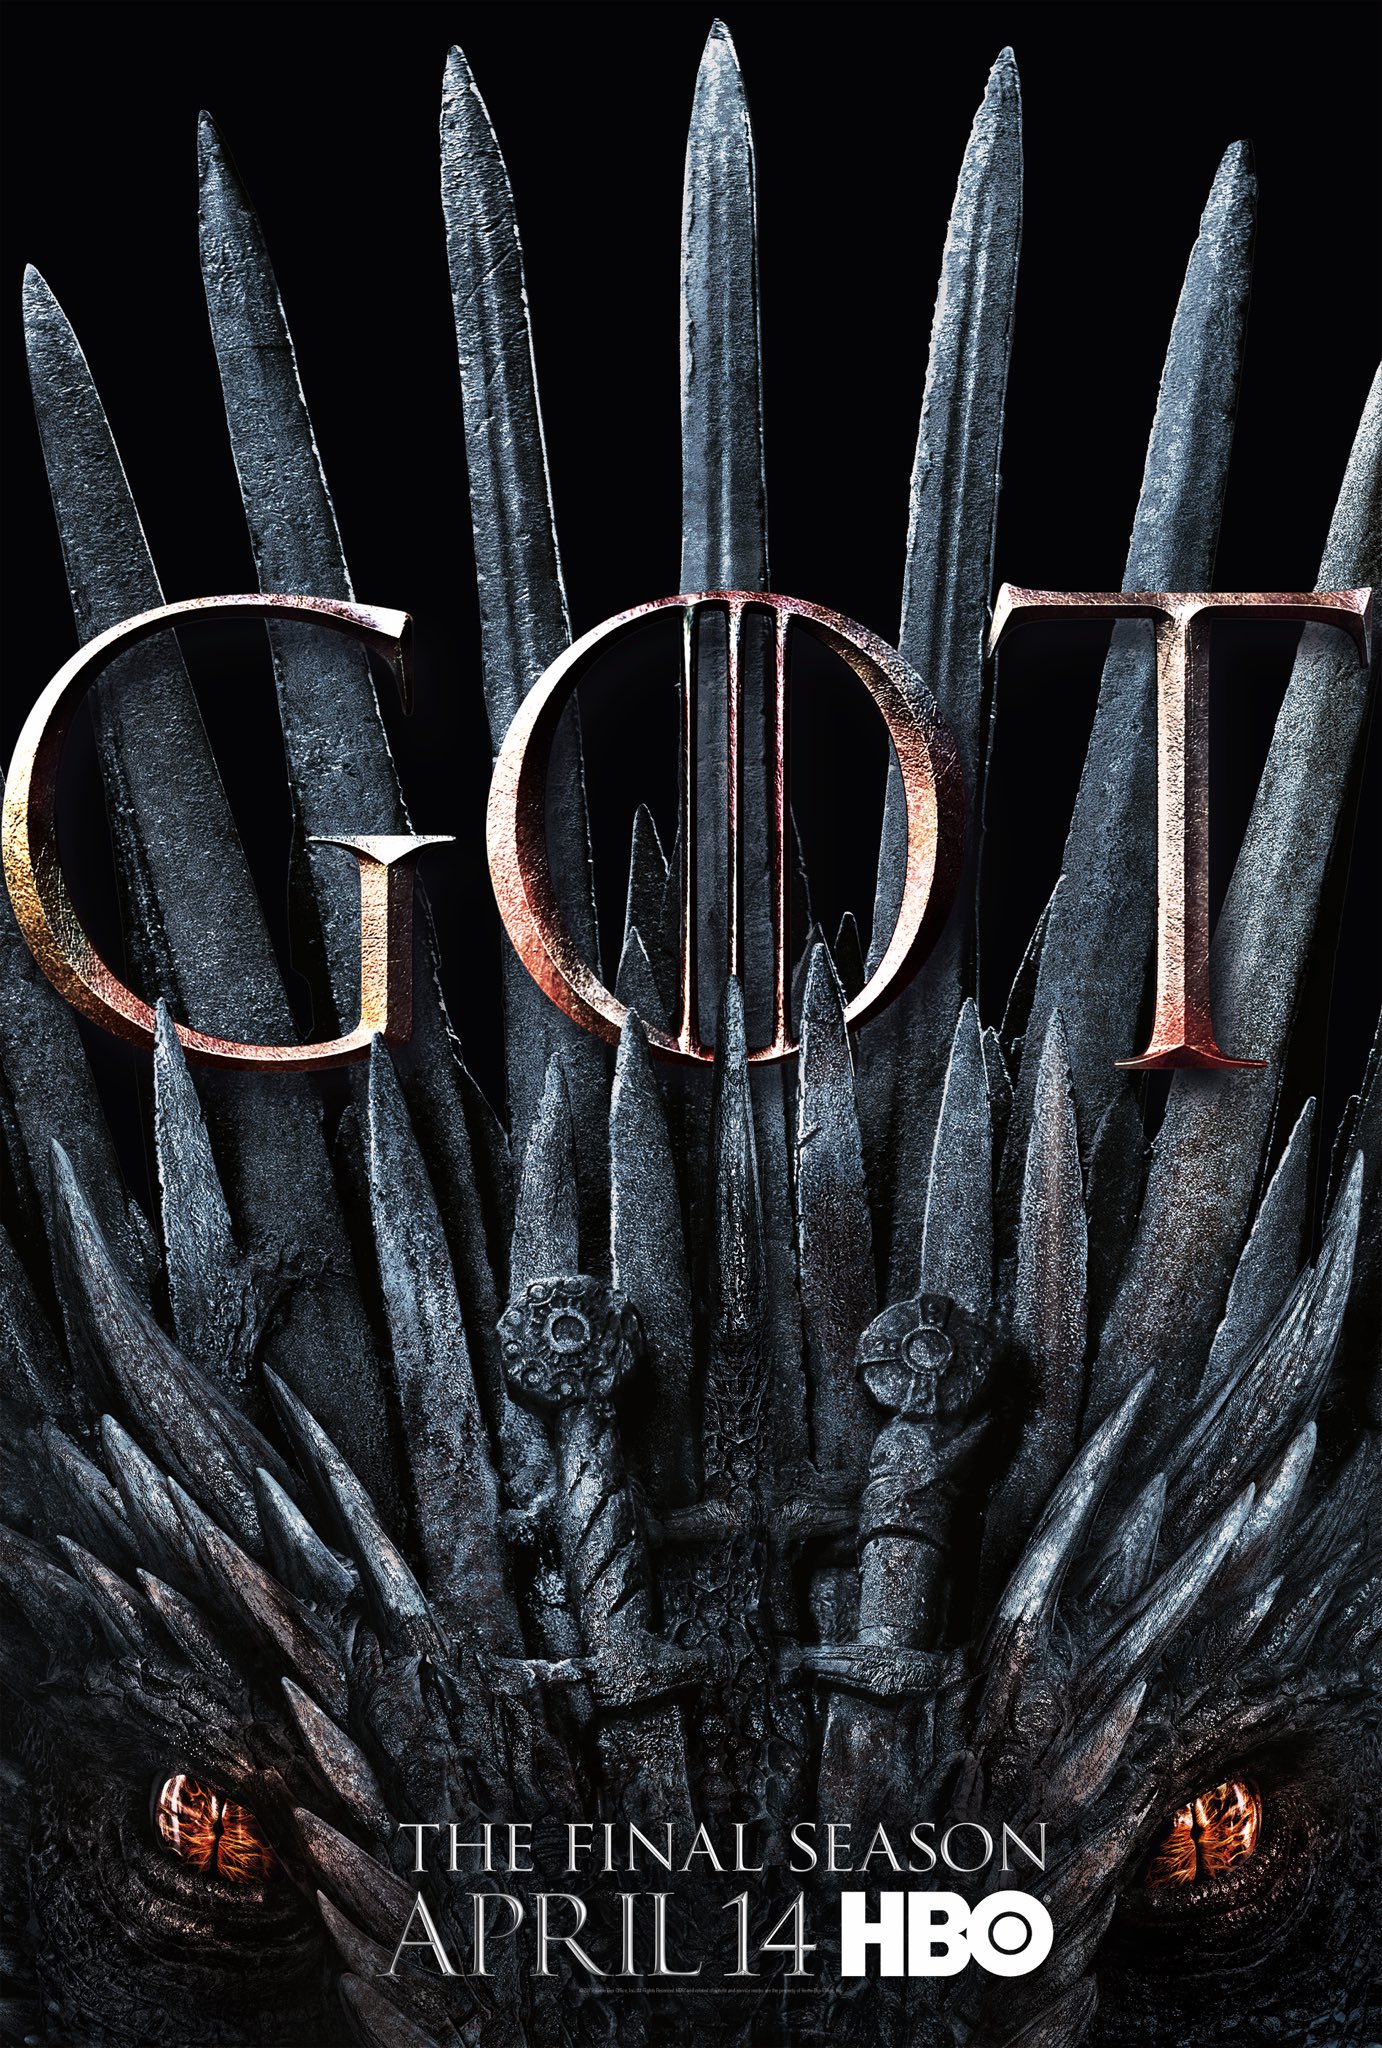 Game Of Thrones: A Dragon Makes Up The Iron Throne In New Poster